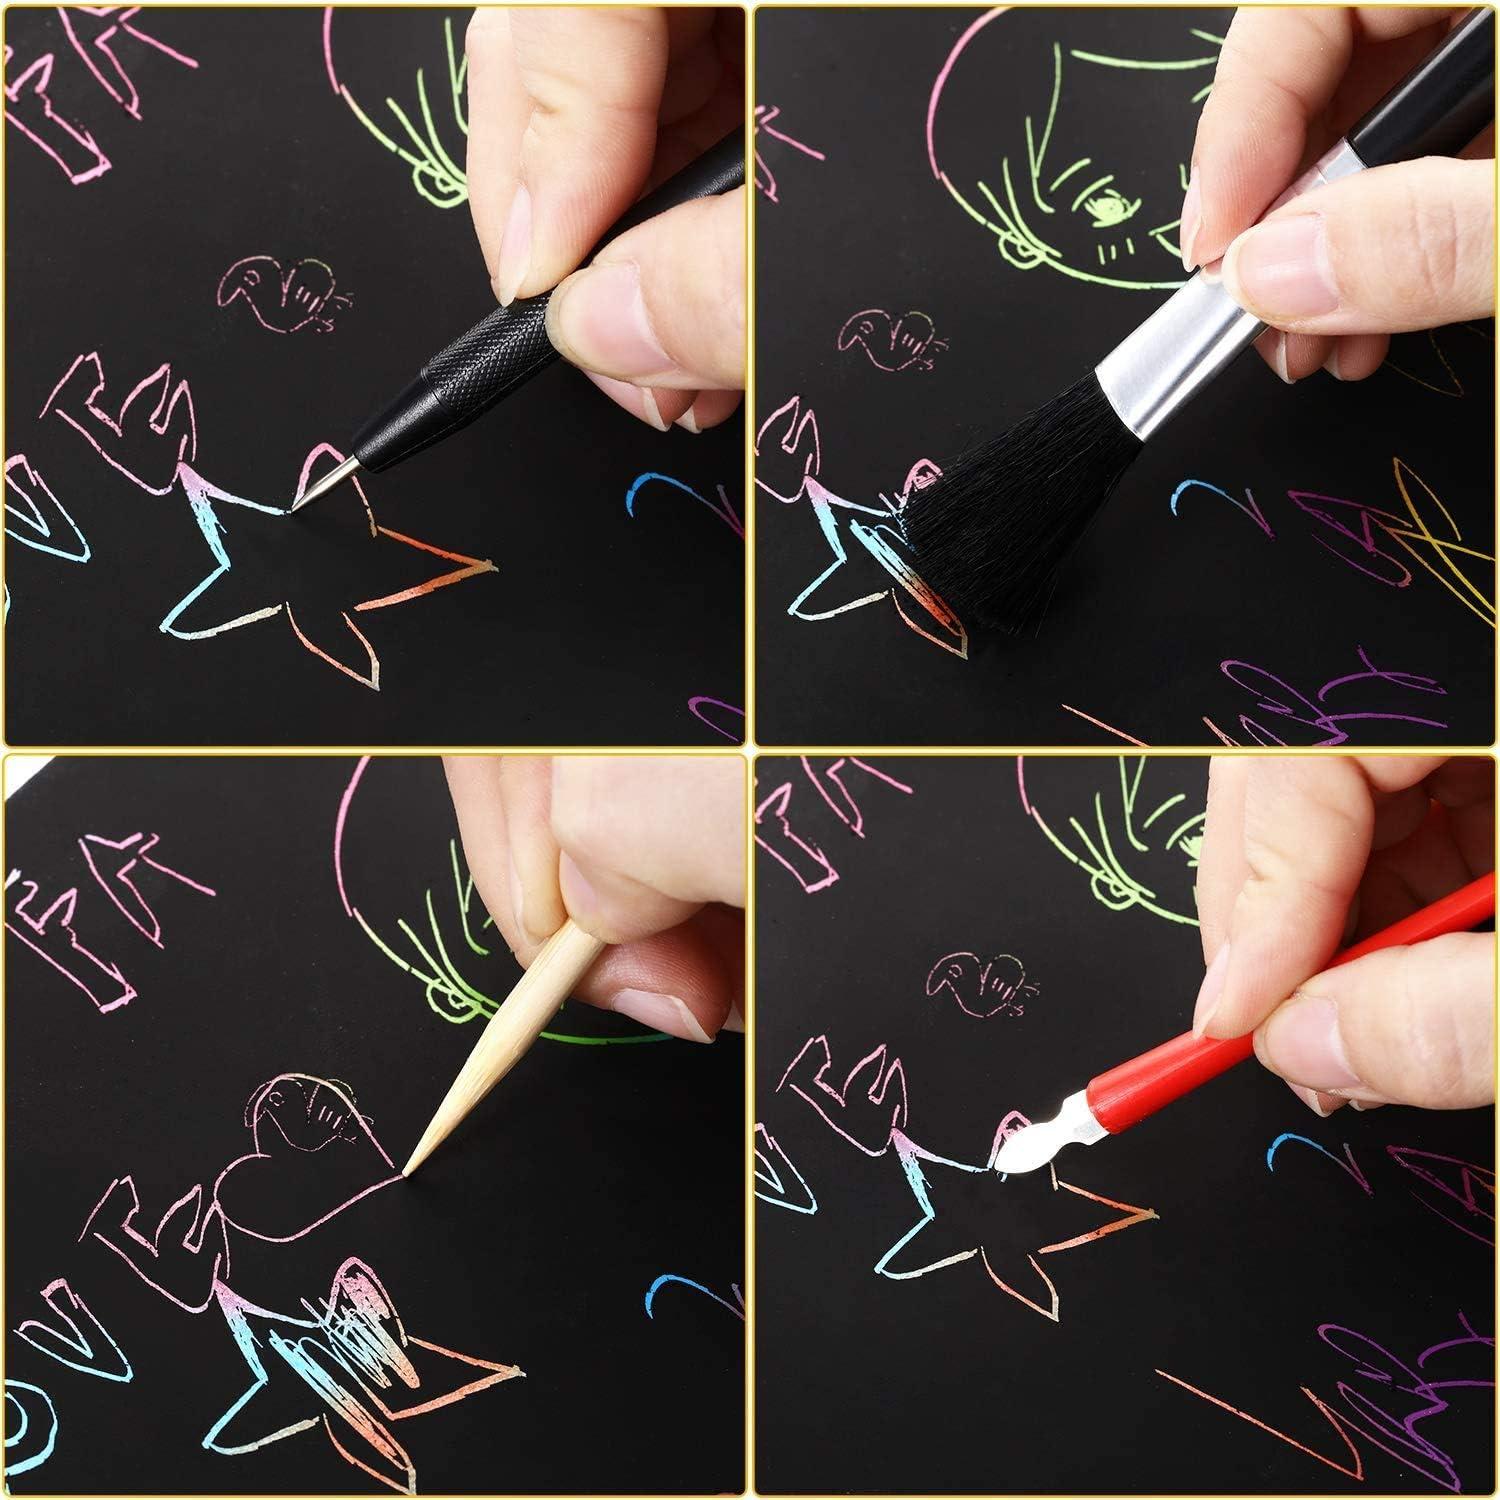 4pcs Painting Drawing Scratch Set With Stick Scraper Pen Black Brush For  Scratch Sketch Papers Boards Tools Diy Gift - Drawing Toys - AliExpress